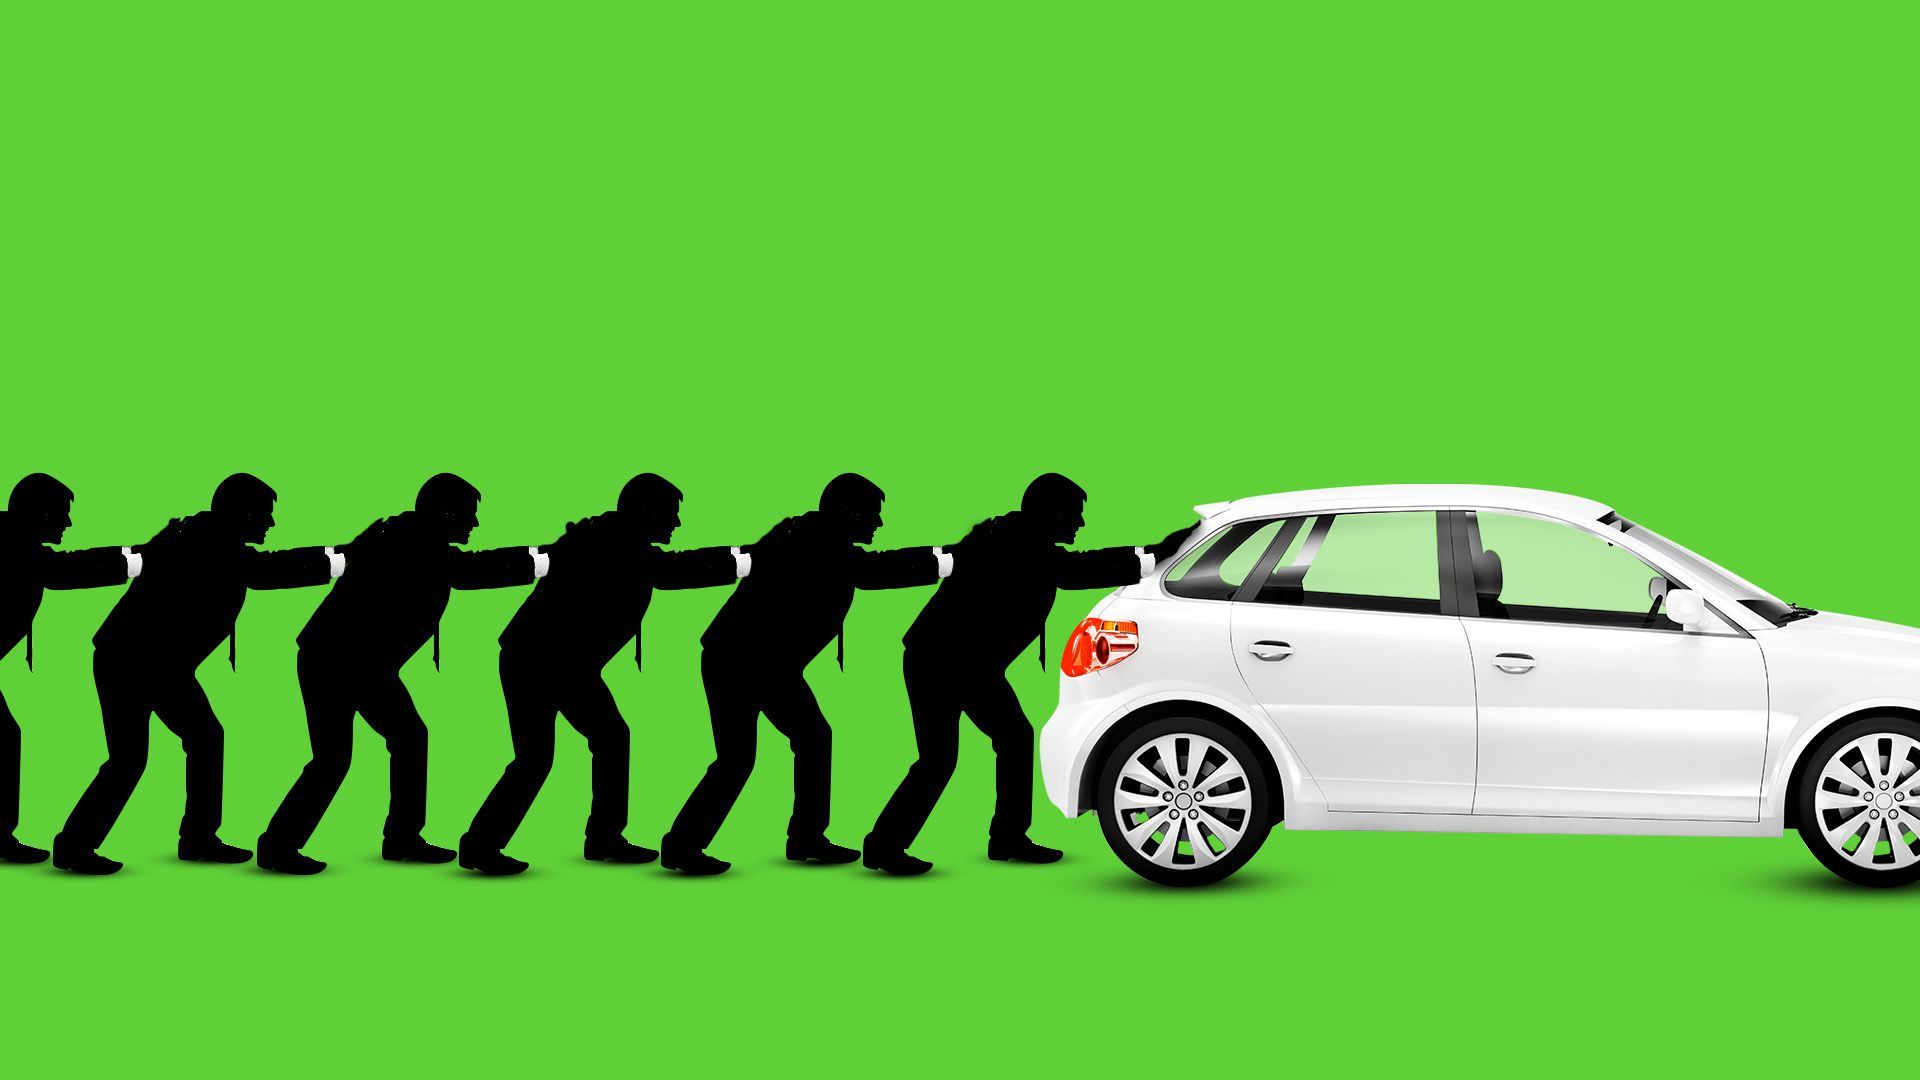 Illustration of a line of men in suits pushing an electric vehicle.  